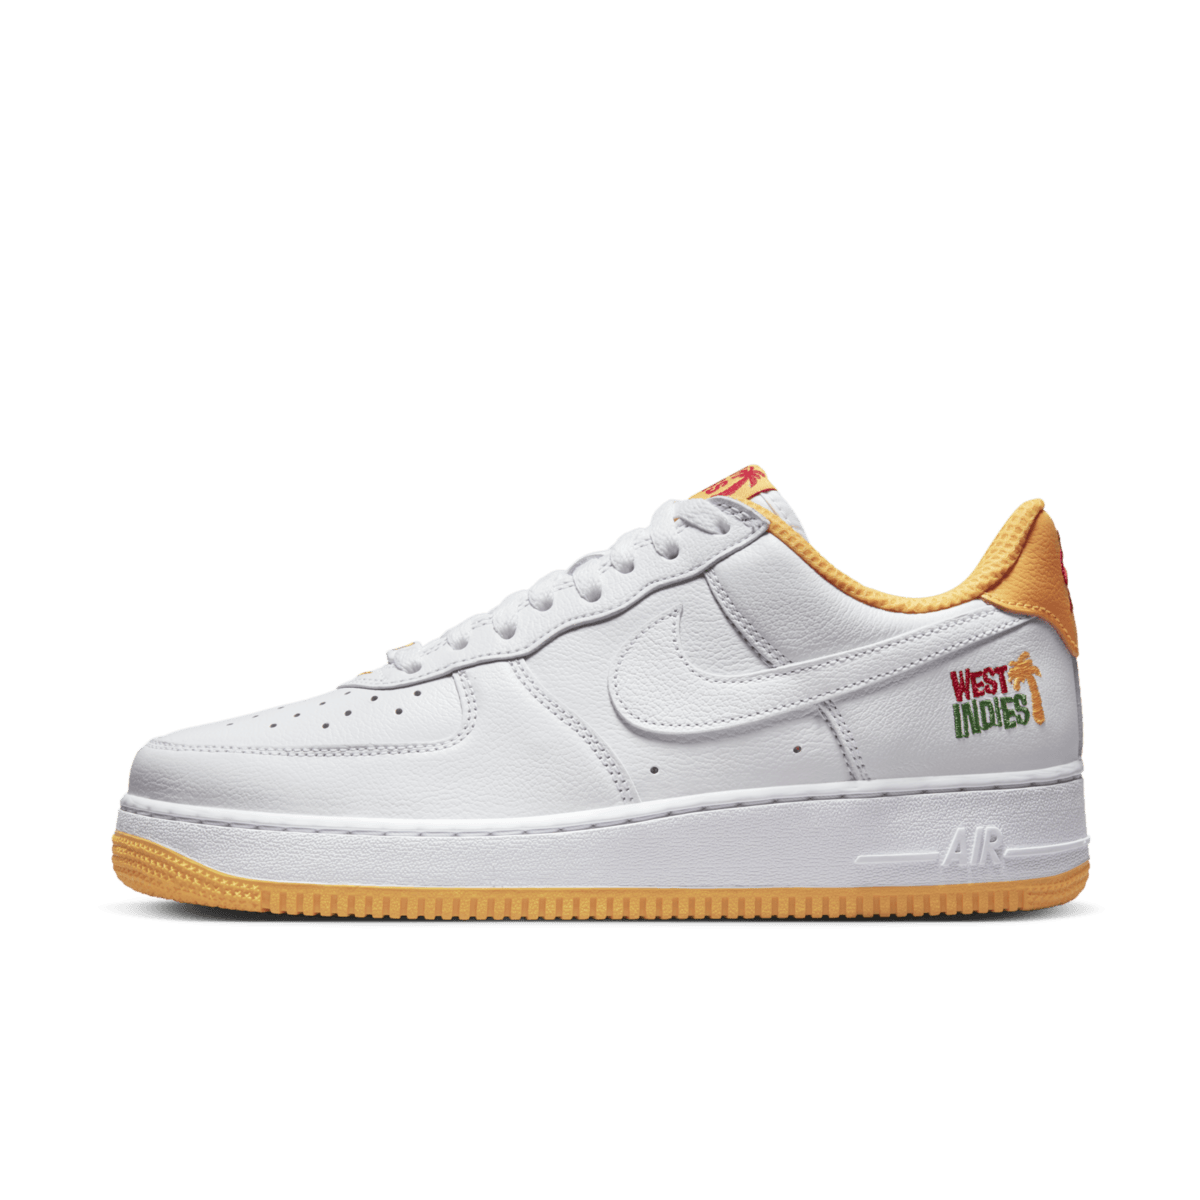 Nike Air Force 1 Low Retro 'West Indies Yellow'